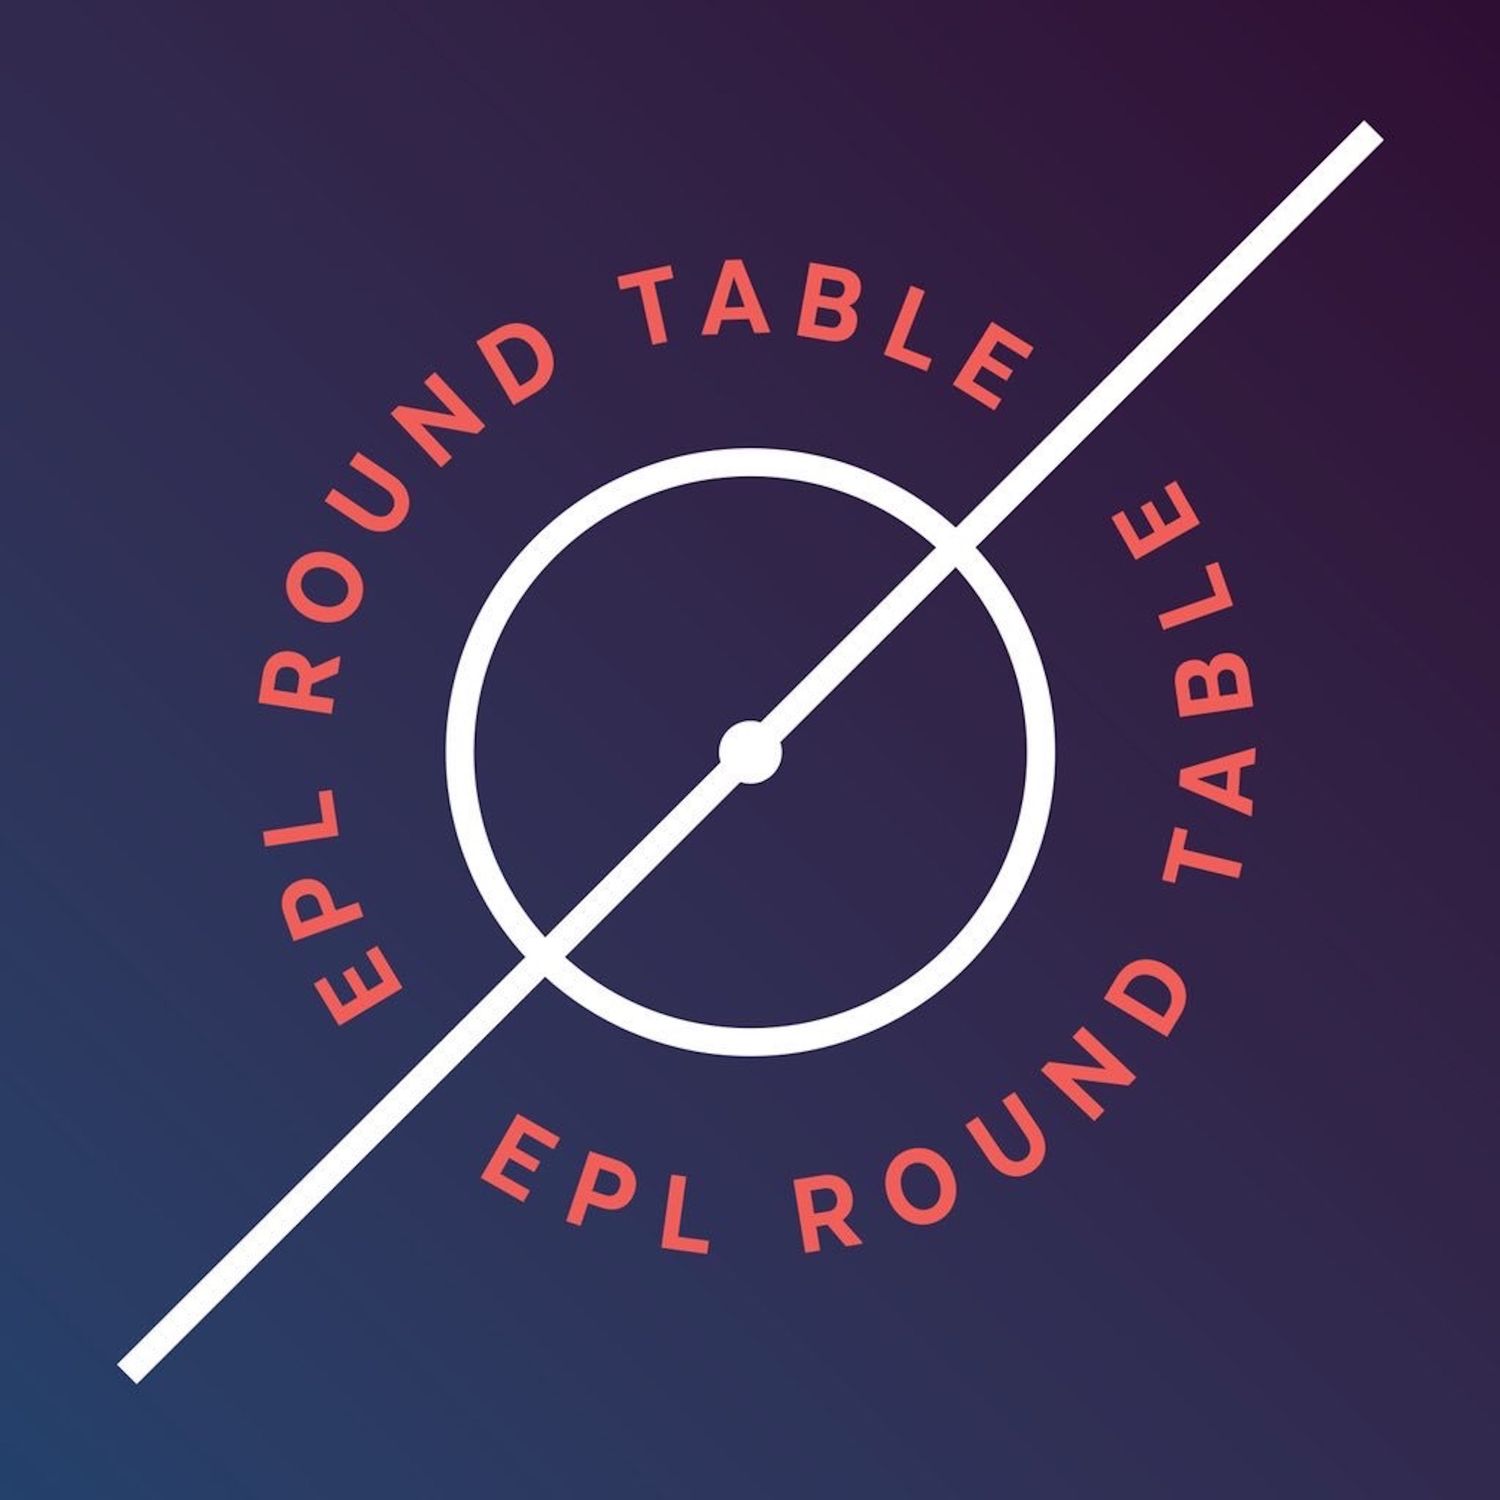 EPL Round Table